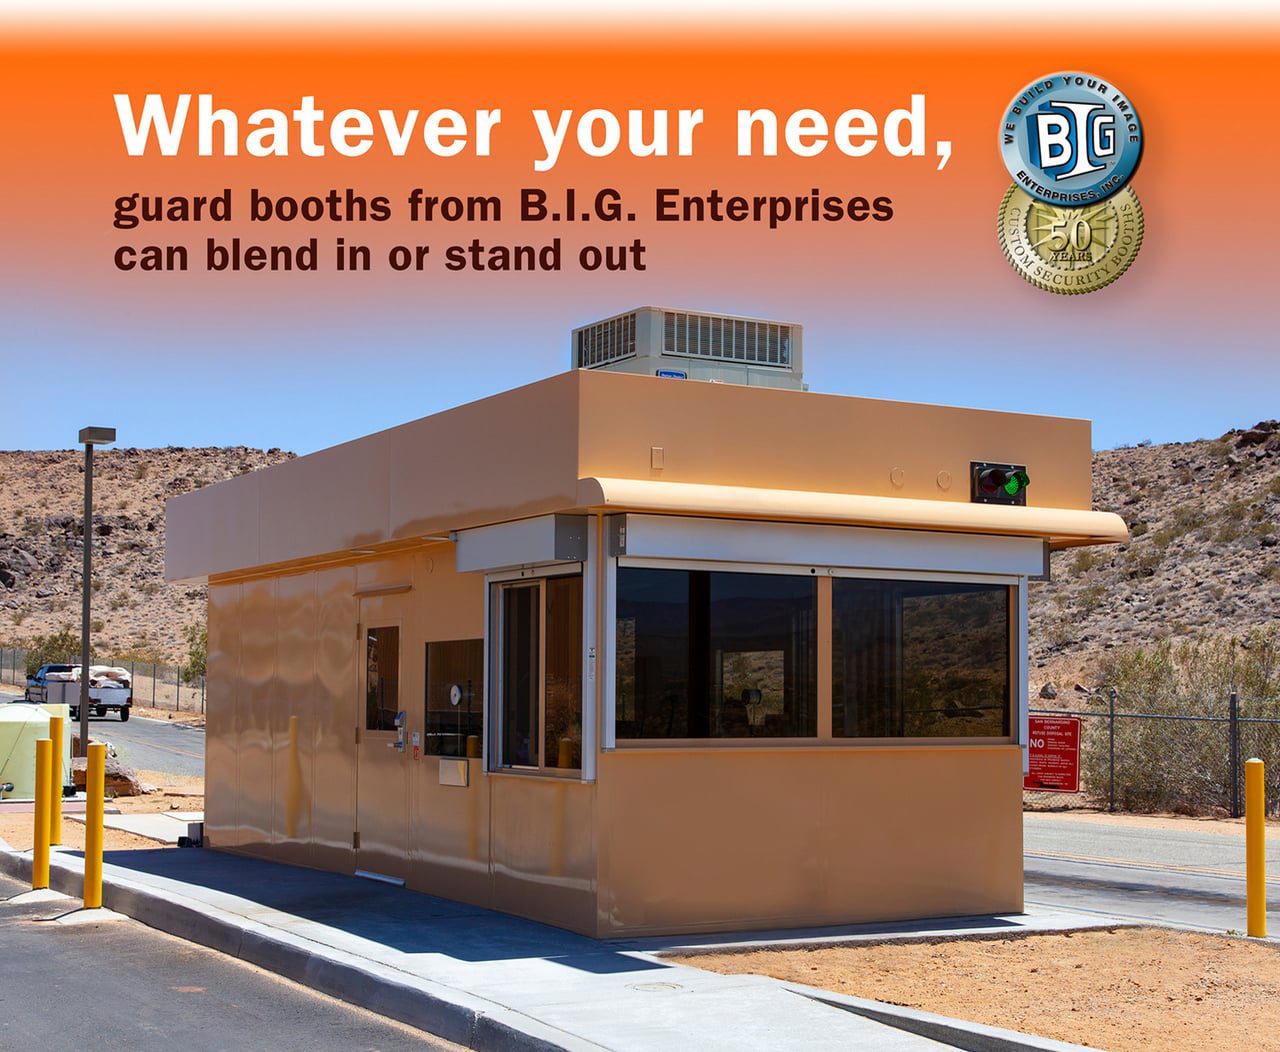 Guard booths from B.I.G. can blend in or stand out